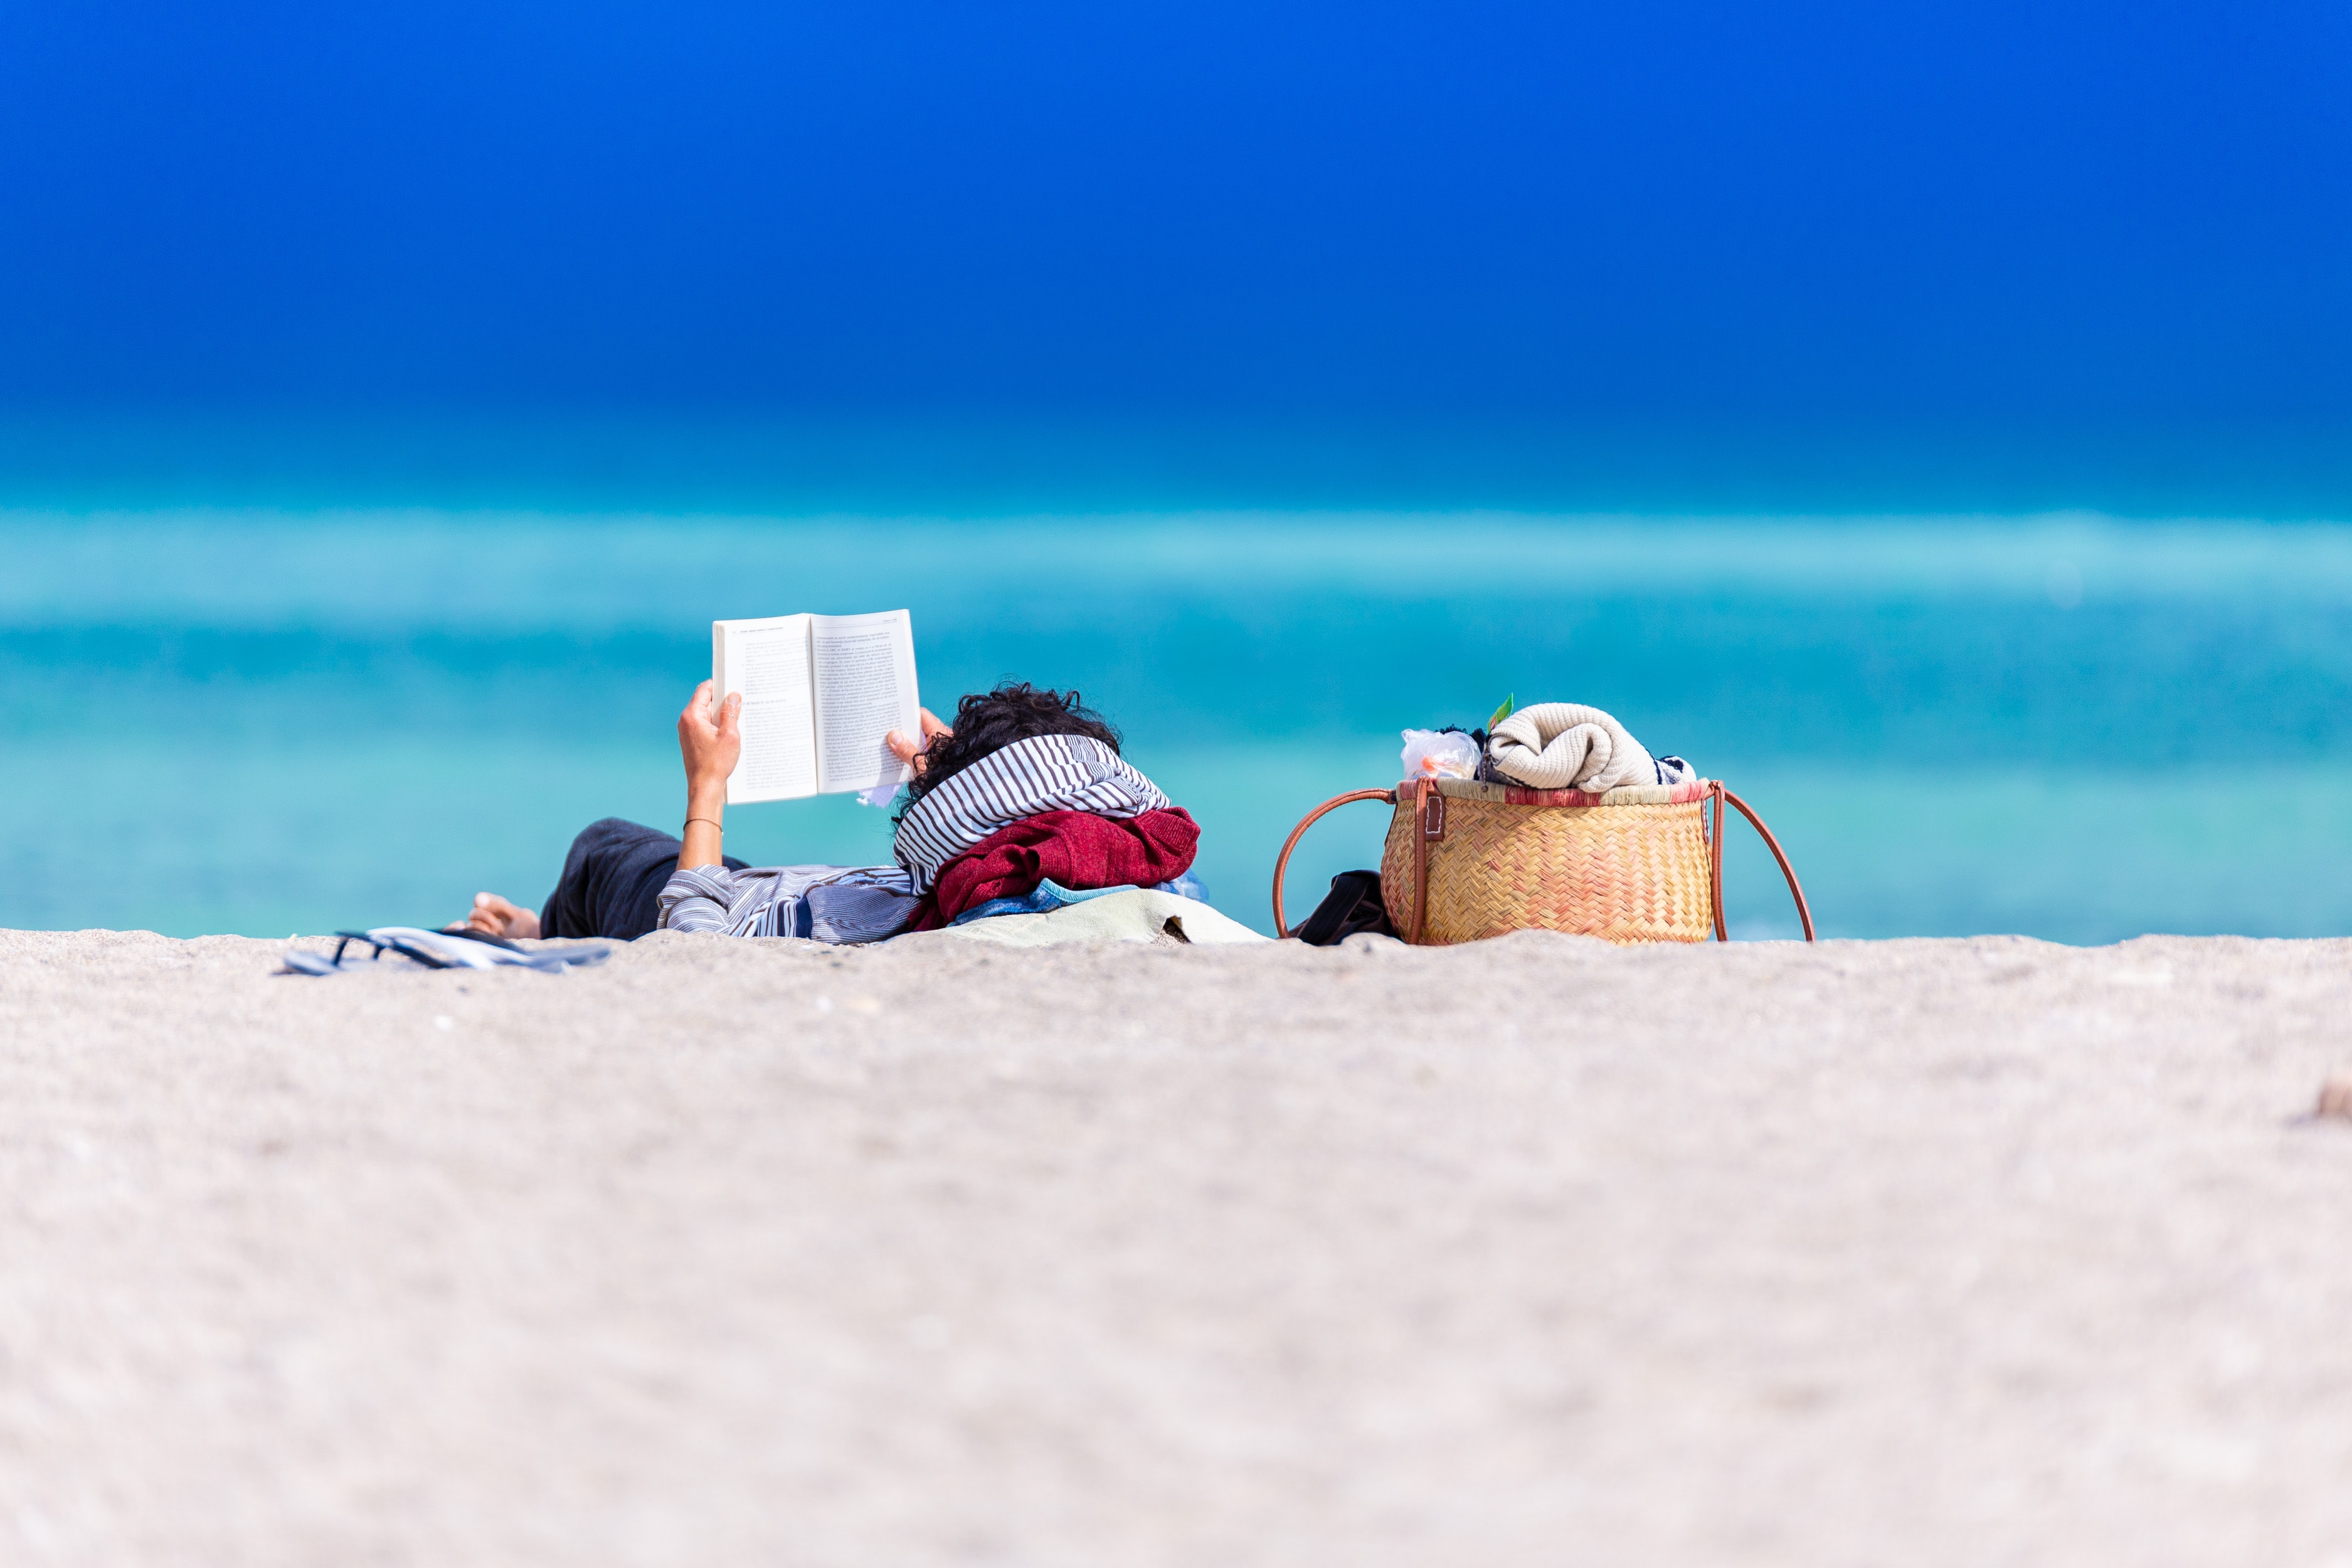 Reading by the beach near clear blue water and sky